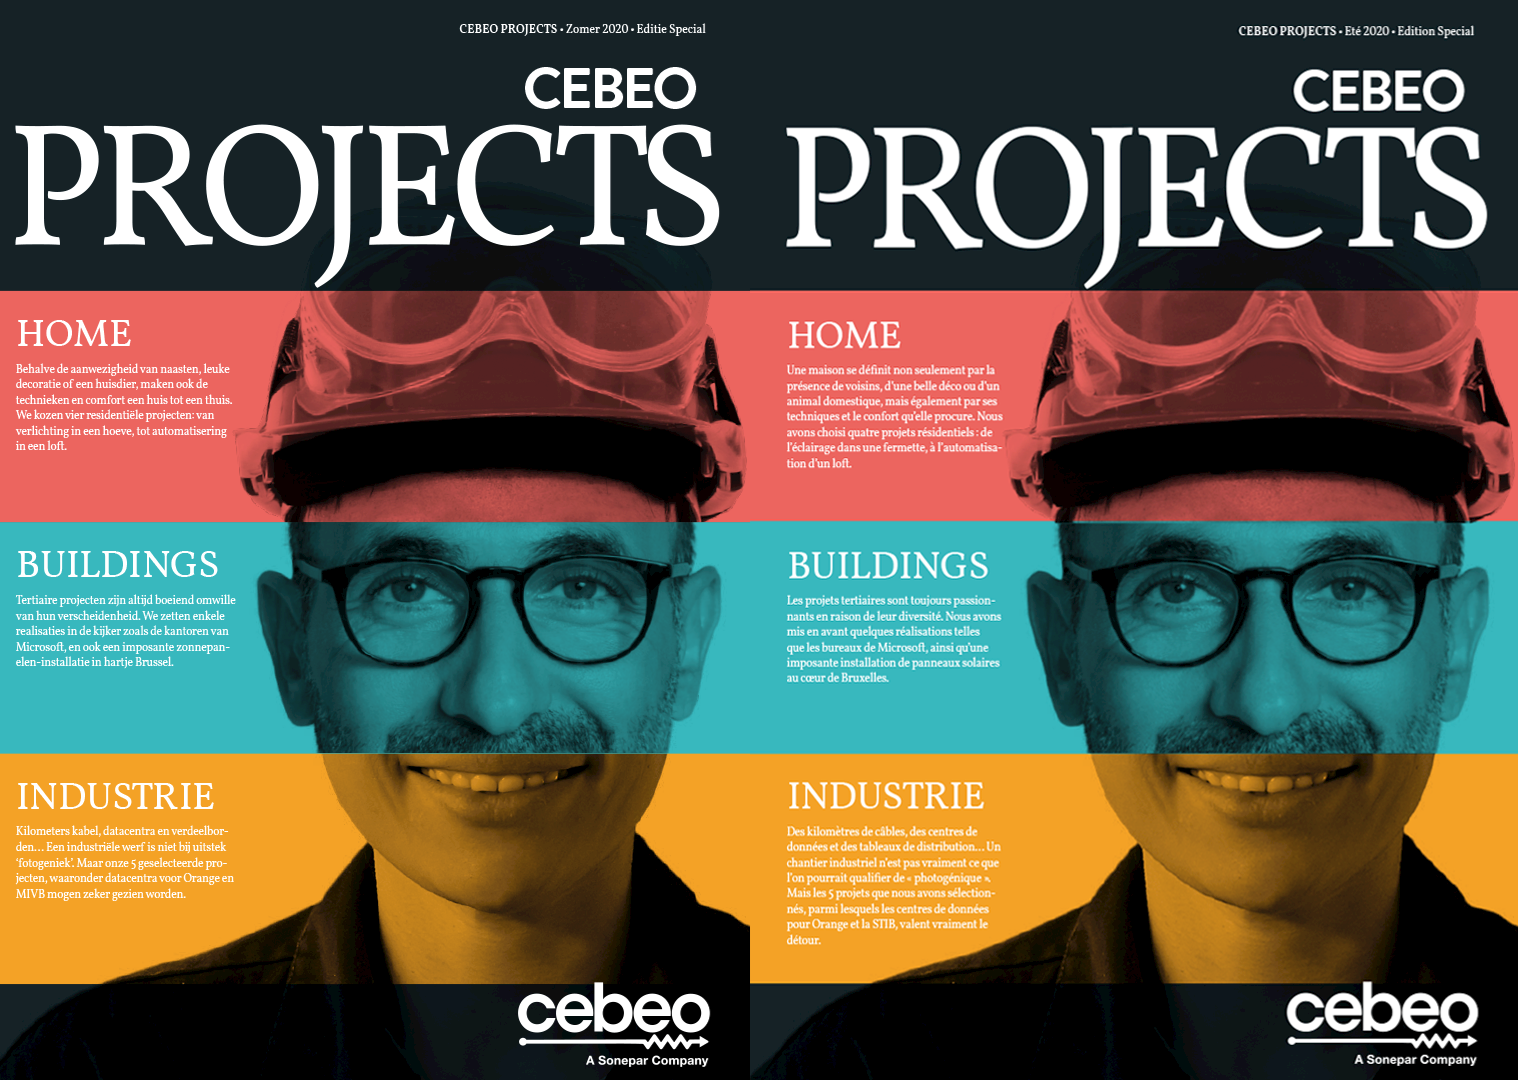 Cebeo Projects